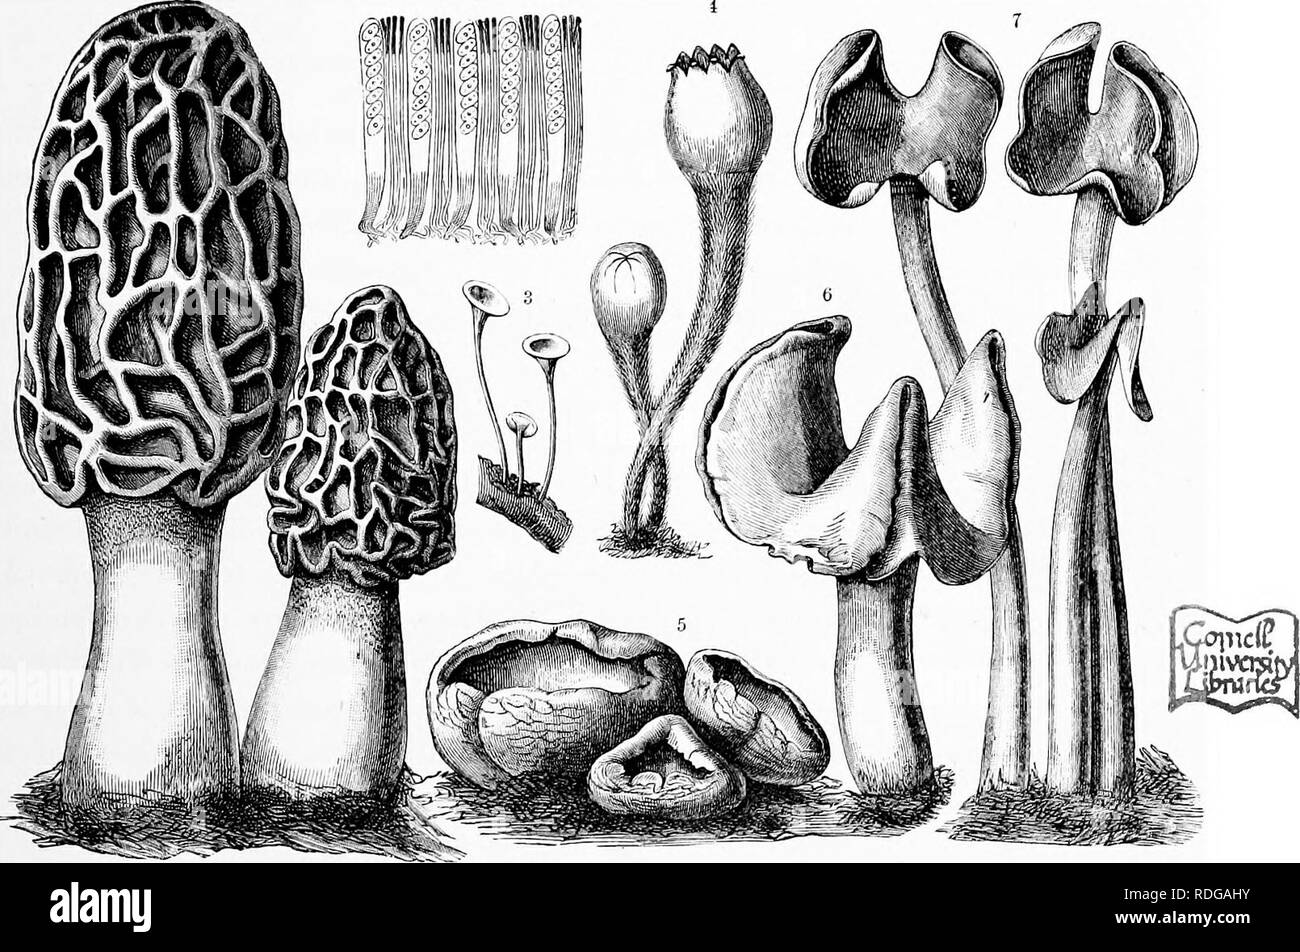 . The natural history of plants, their forms, growth, reproduction, and distribution;. Botany. THALLOPHYTA. 68a and 388^) and plaited; the whole of the exposed surface of this receptacle is covered with asci. The Morel (Morchella esculenta, fig. 3881) possesses a thick stalk bearing a large fleshy receptacle marked out in pitted areas. Nearly allied is the genus Oeoglossum, possessing club-shaped receptacles, black in colour, and covered with asci. 0. difforme, 2-4 inches high, is often met with among grass in the autumn. The Lichenes belonging to this family are treated with the other Lichens Stock Photo